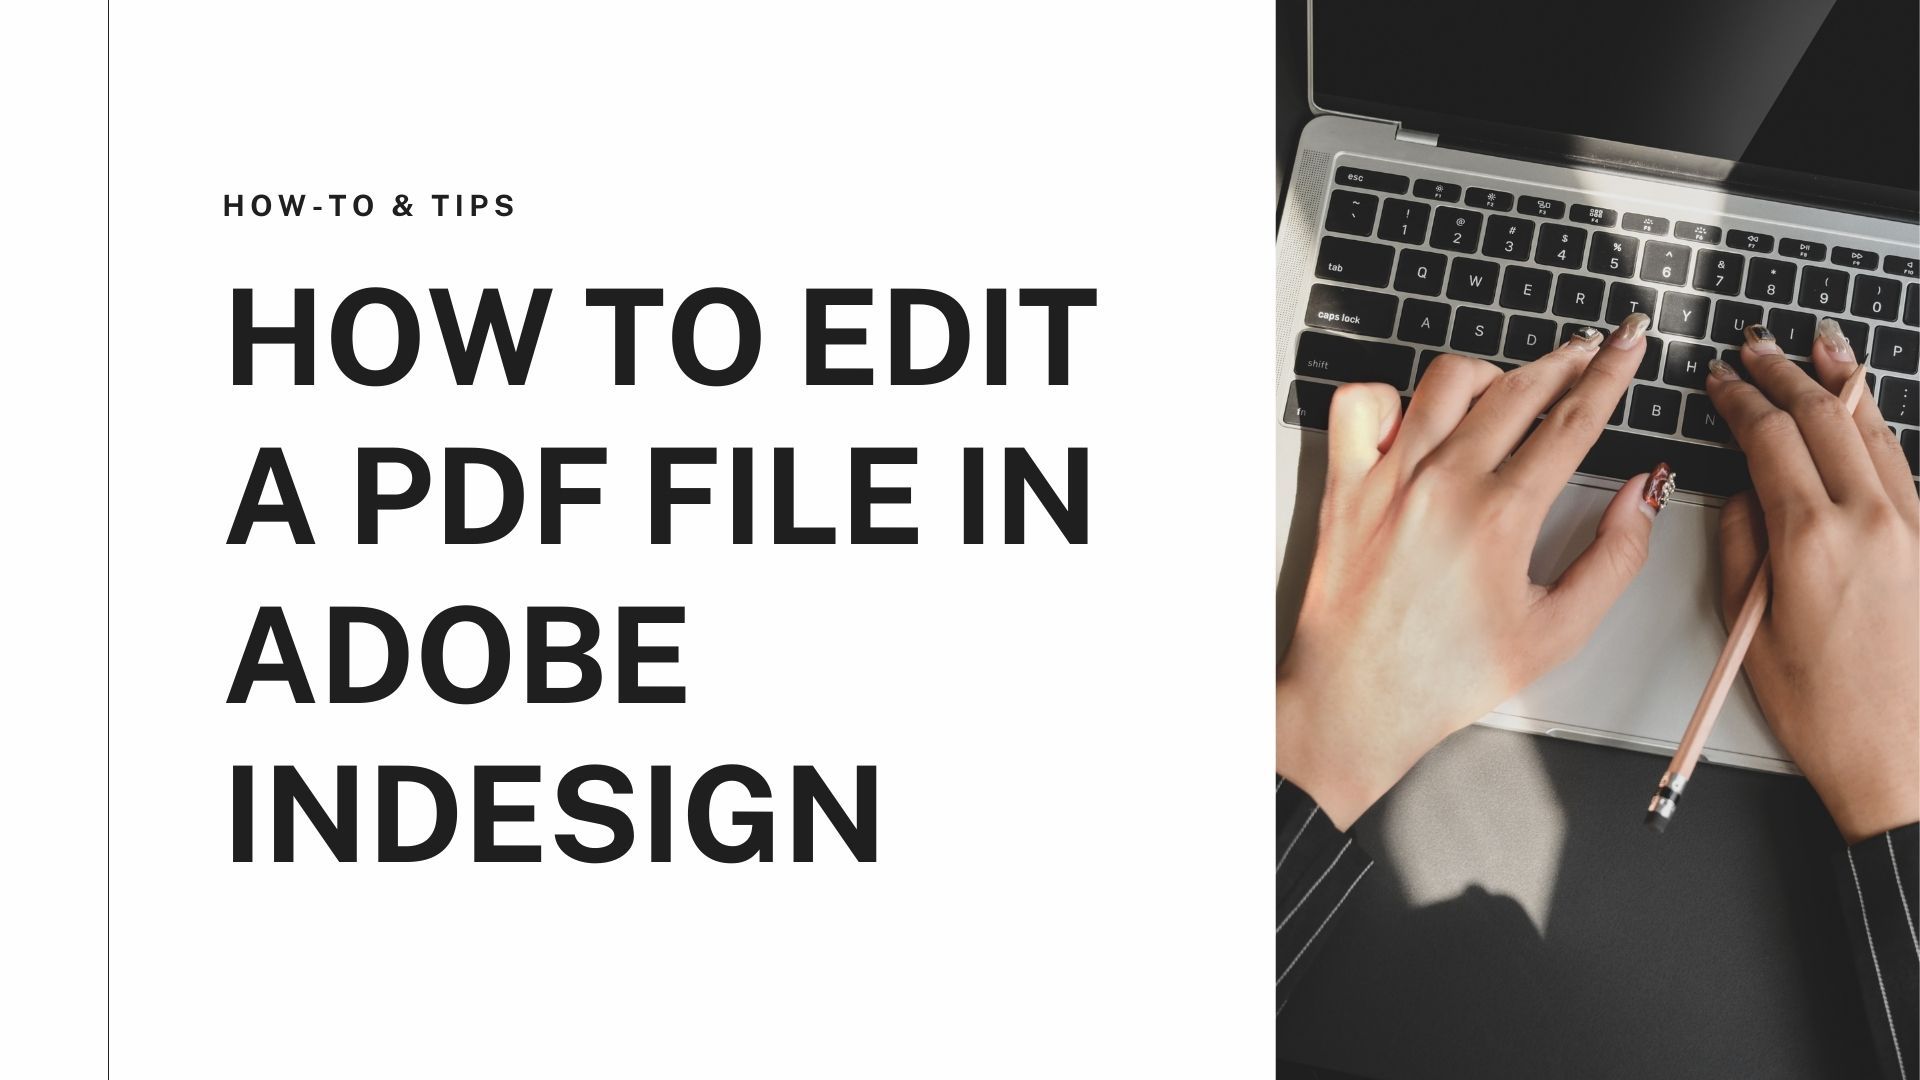 How to edit a PDF file in Adobe InDesign.jpg